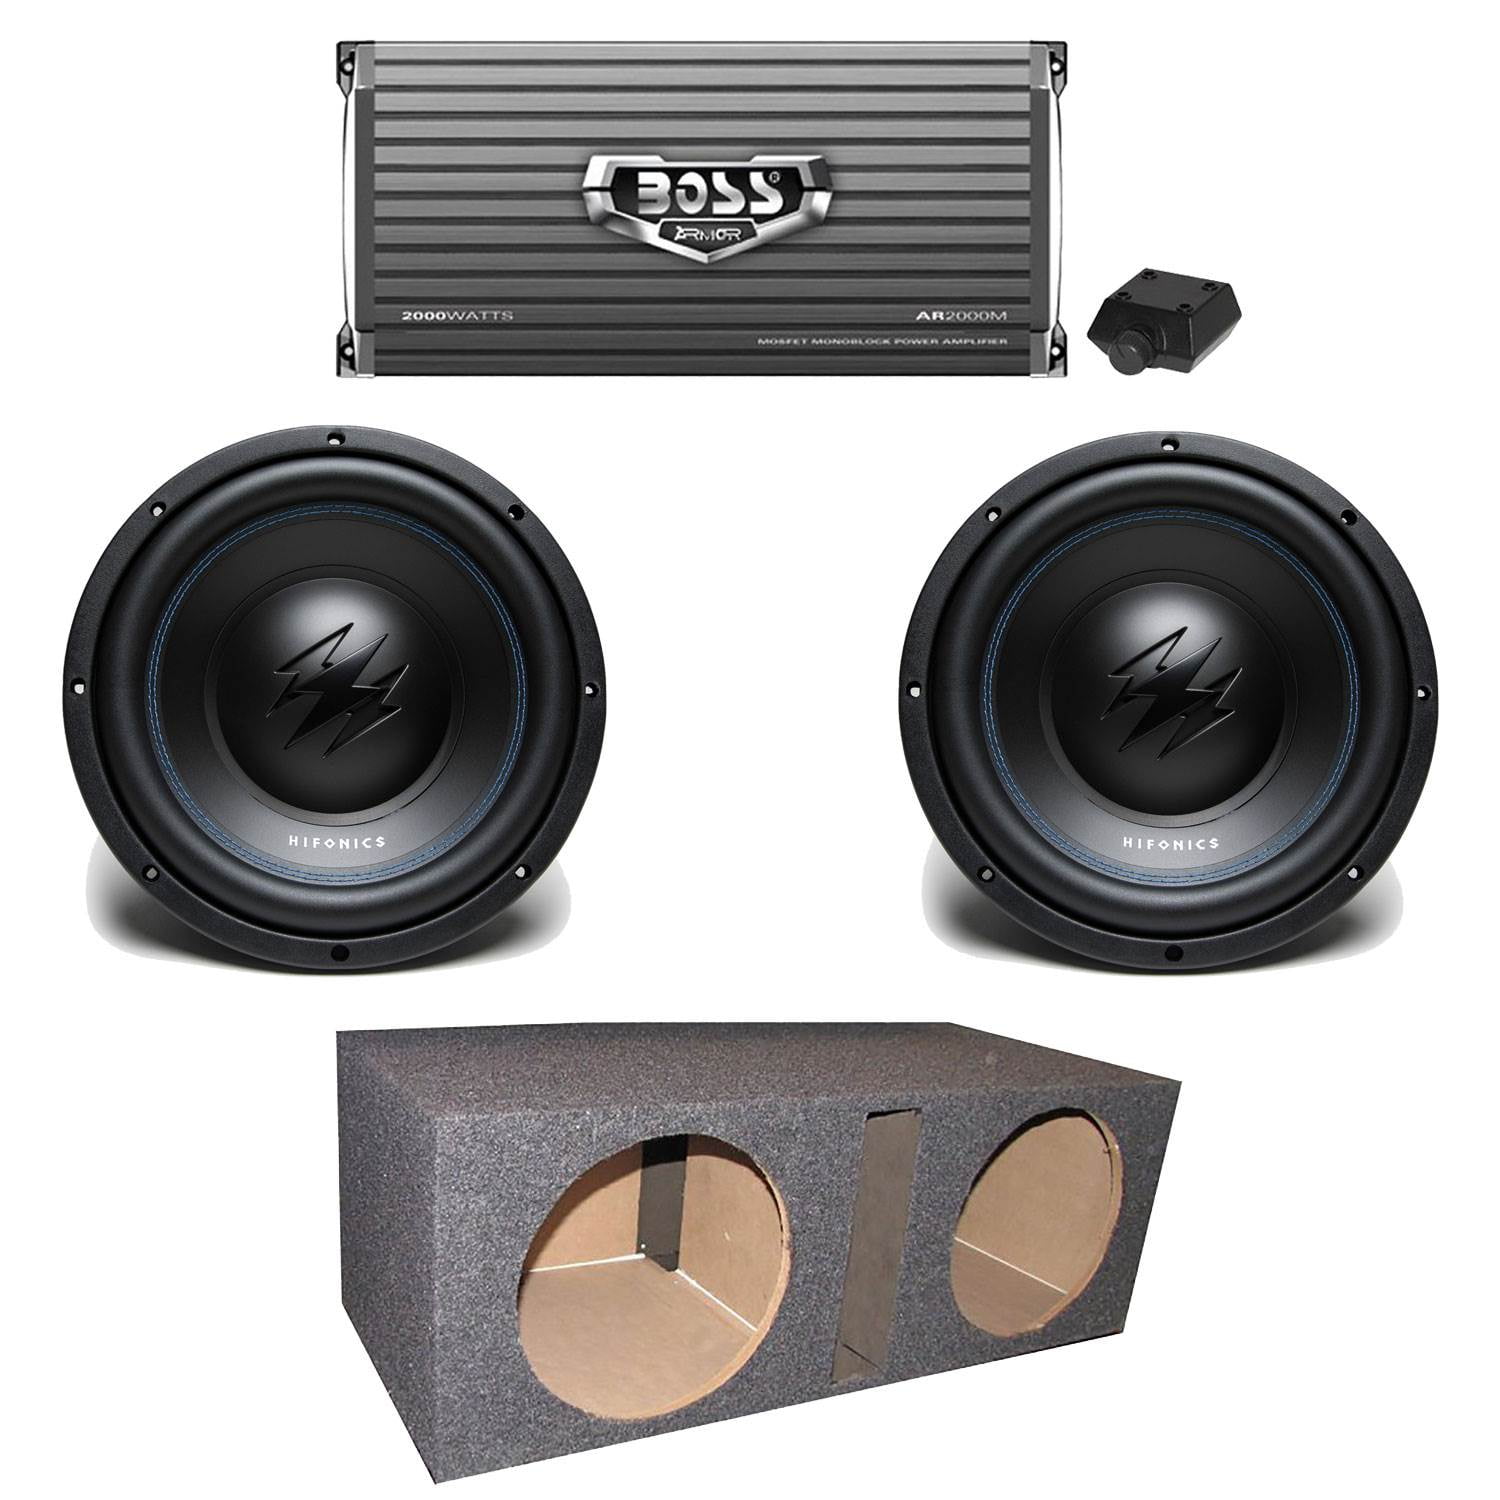 Hifonics 10 Inch Subwoofer (2 Pack) + Complete Installation Kit and